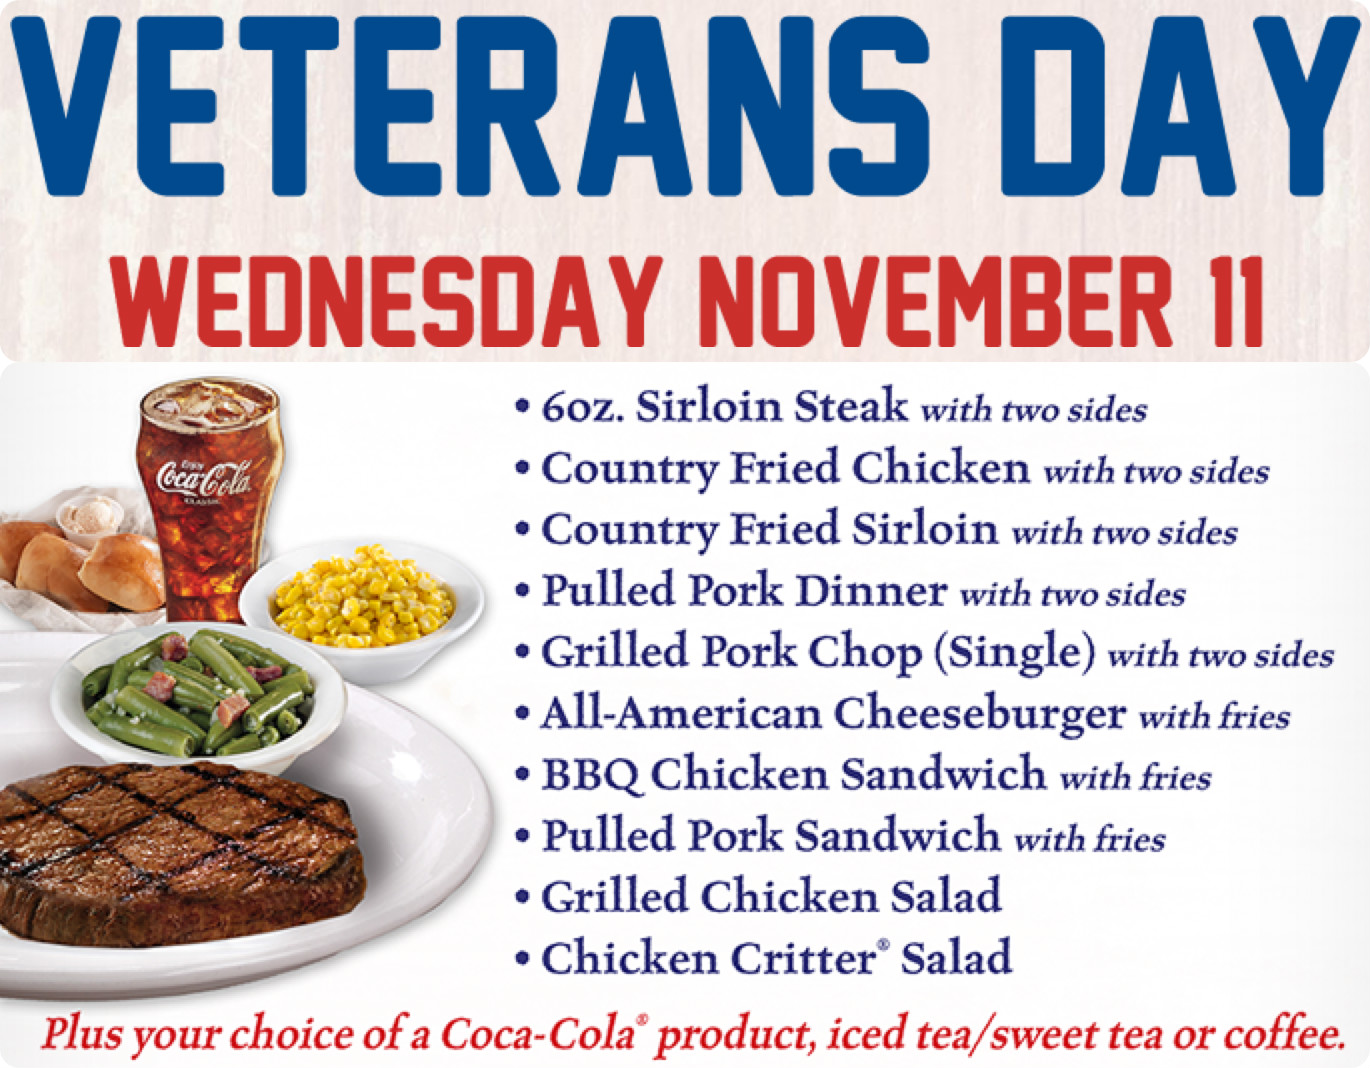 Texas Roadhouse FREE Lunch for Veterans & Active Duty Military on